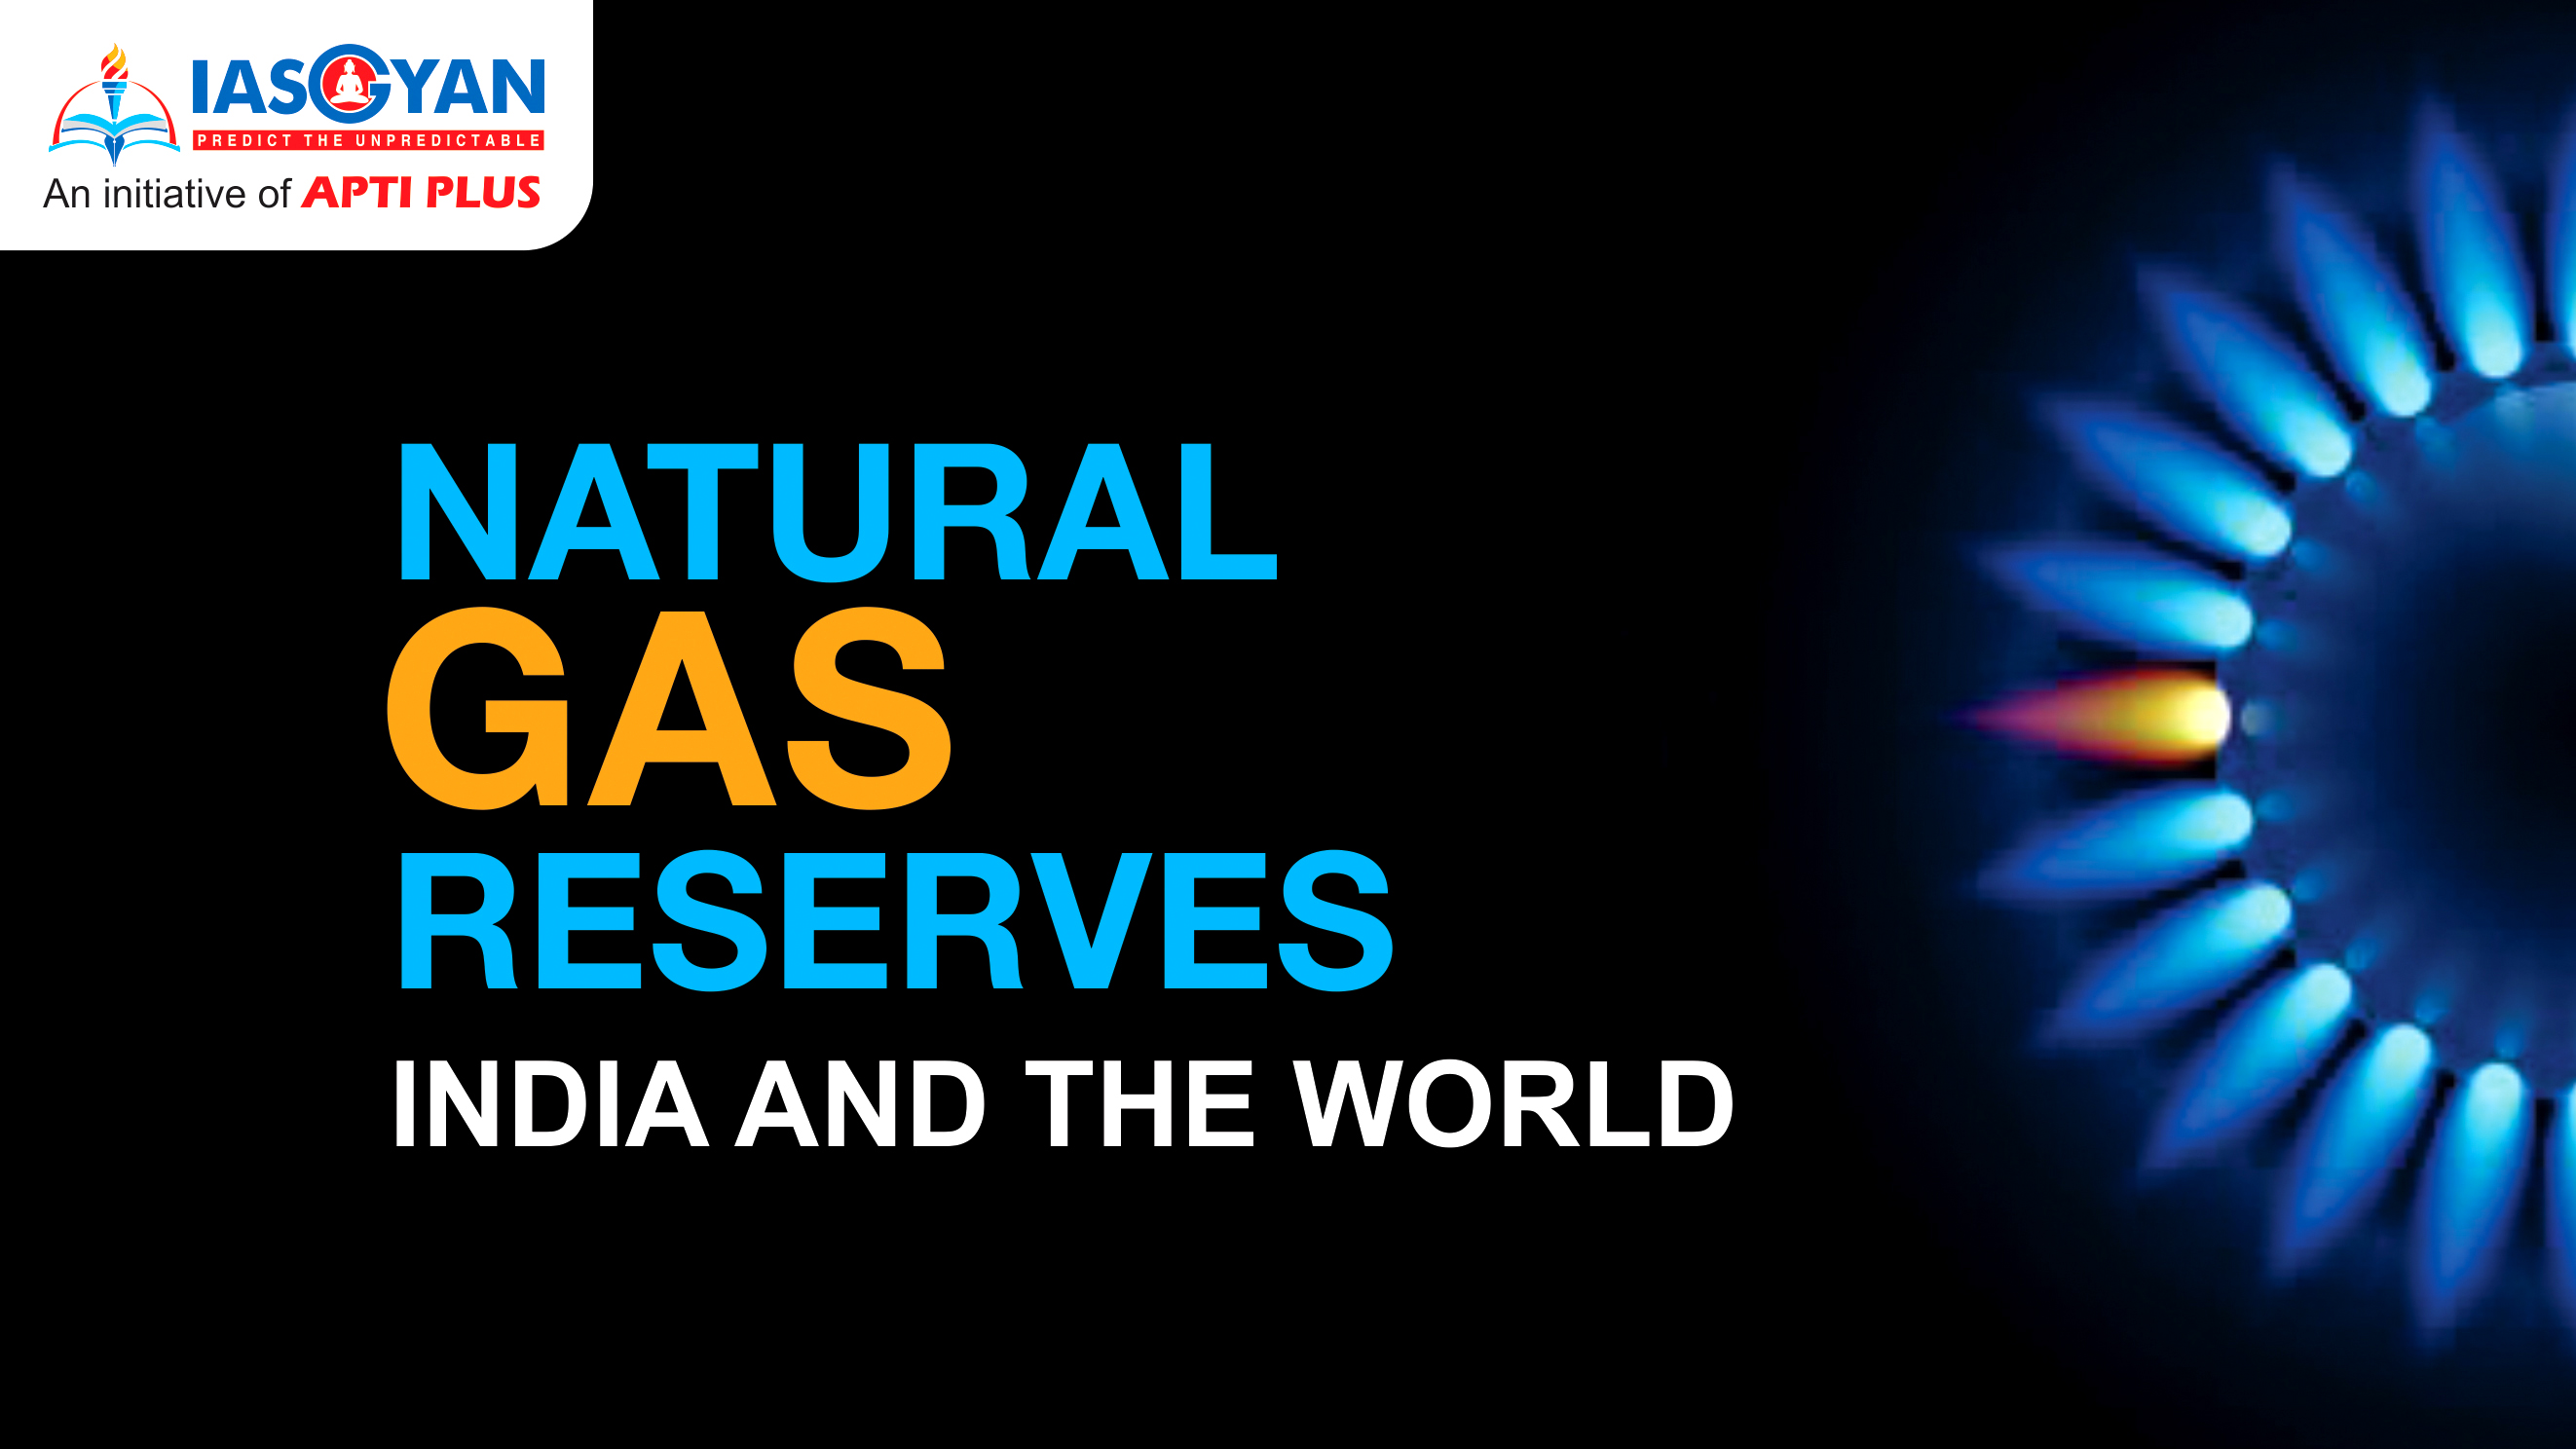 NATURAL GAS RESERVES: INDIA AND THE WORLD